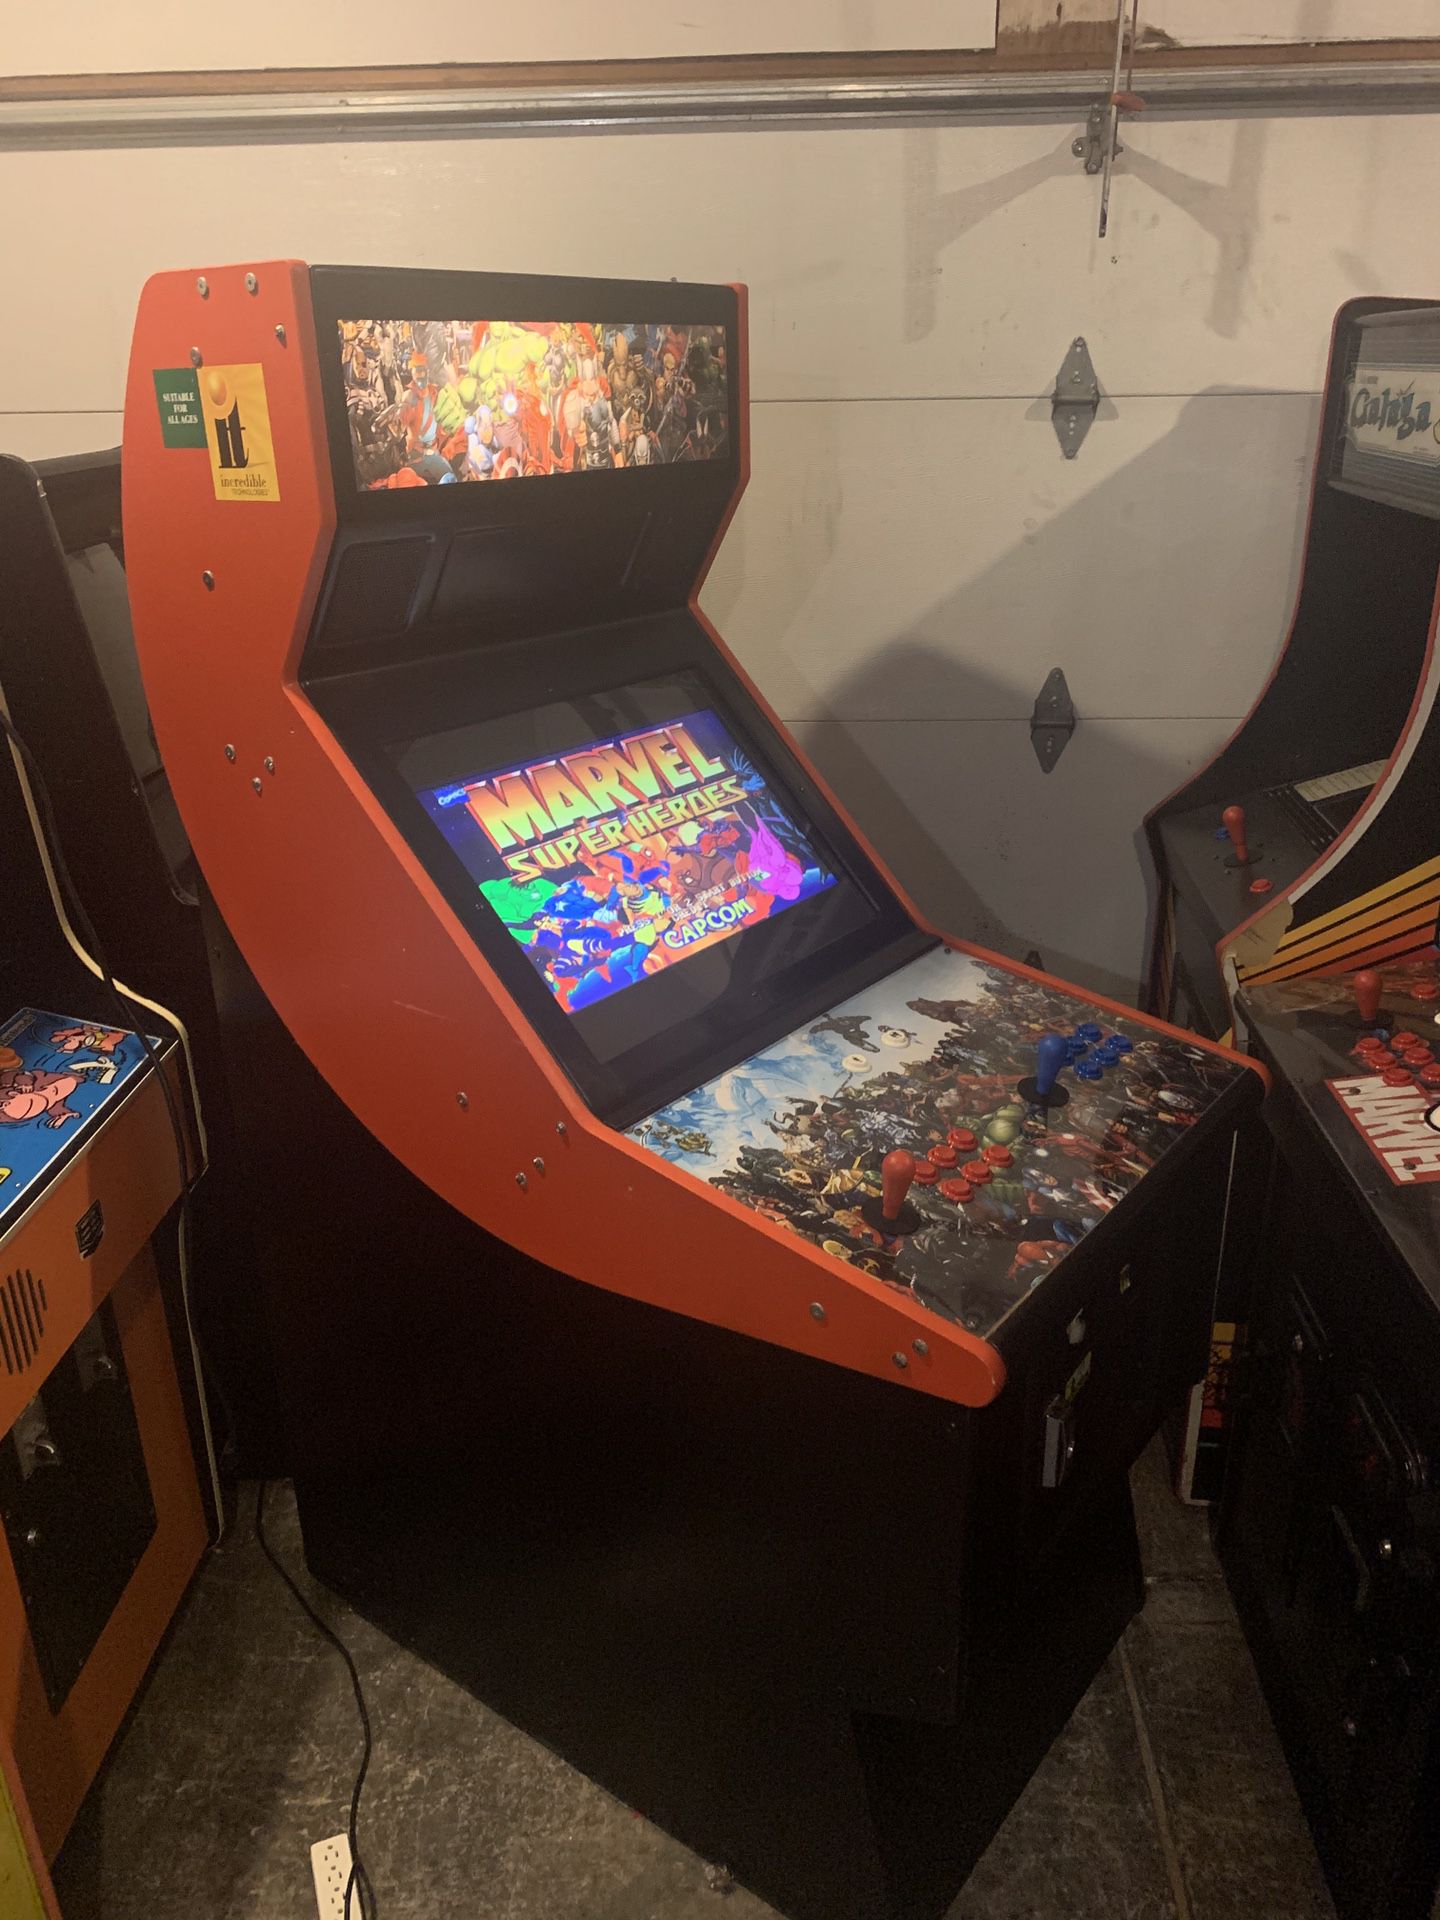 Just built arcade game plays all the classics from the 80s and 90s Pac-Man ,Galaga,mortal KOMBAT ,Simpsons 1299 games